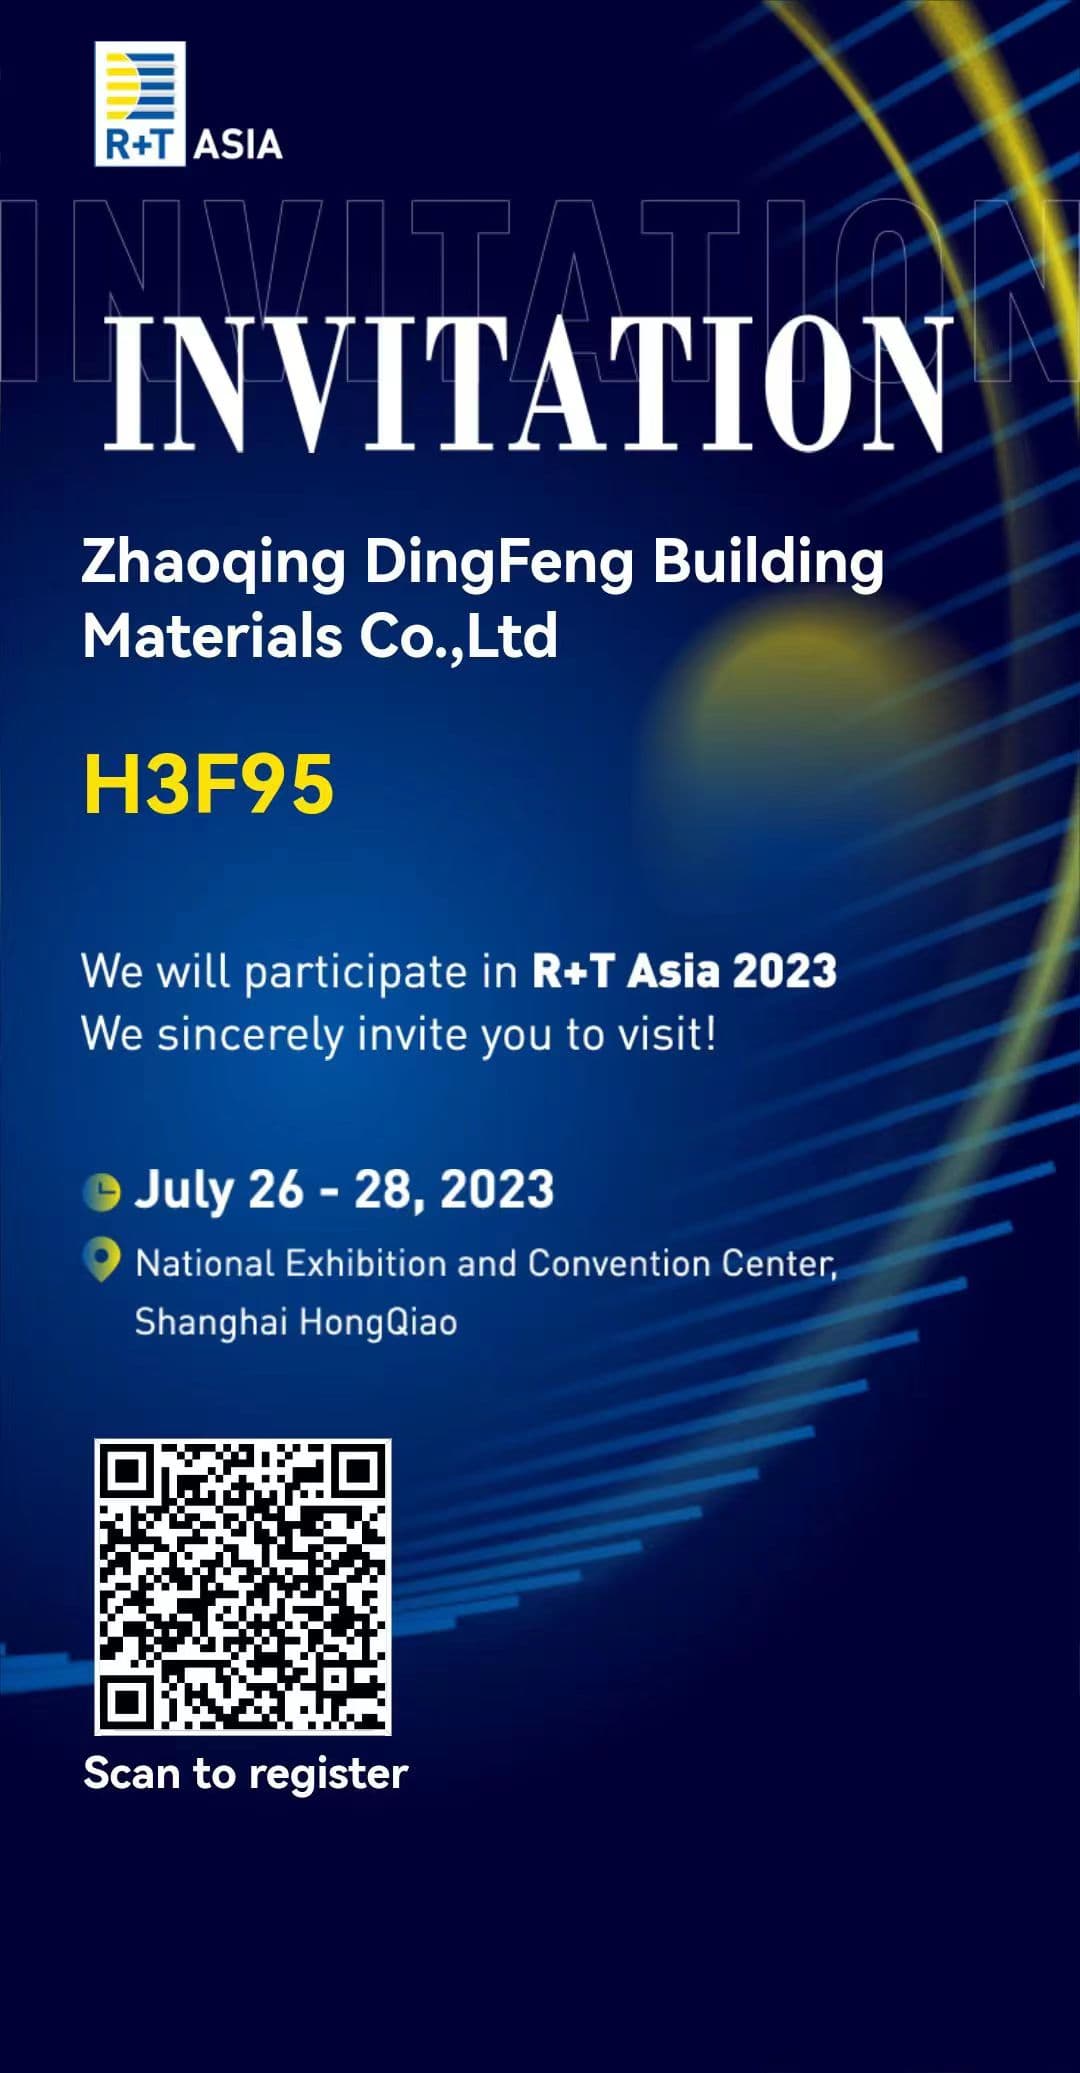 Welcome To R+T Asia 2023 In Shanghai